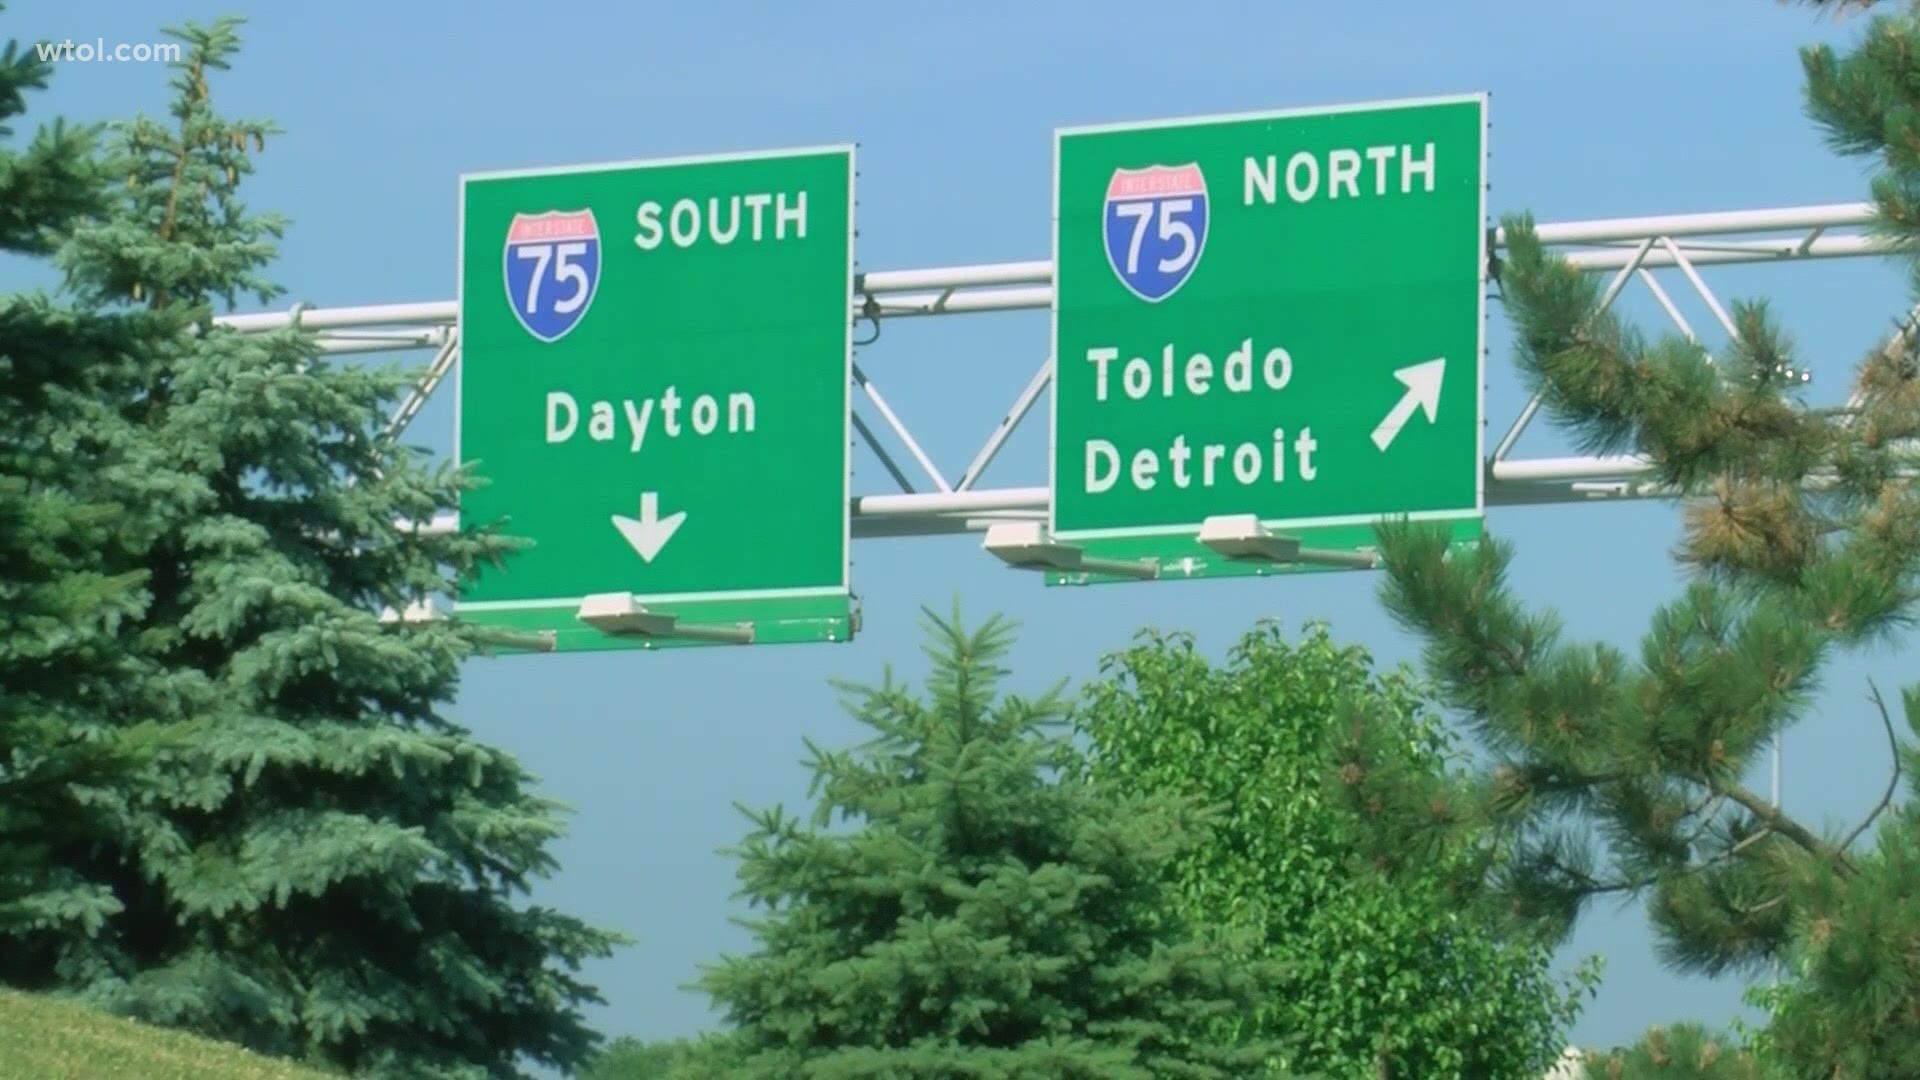 Ohio is warning against traveling to or from the state as its COVID-19 positivity rate rose above 15 percent, placing it on its own travel advisory list.